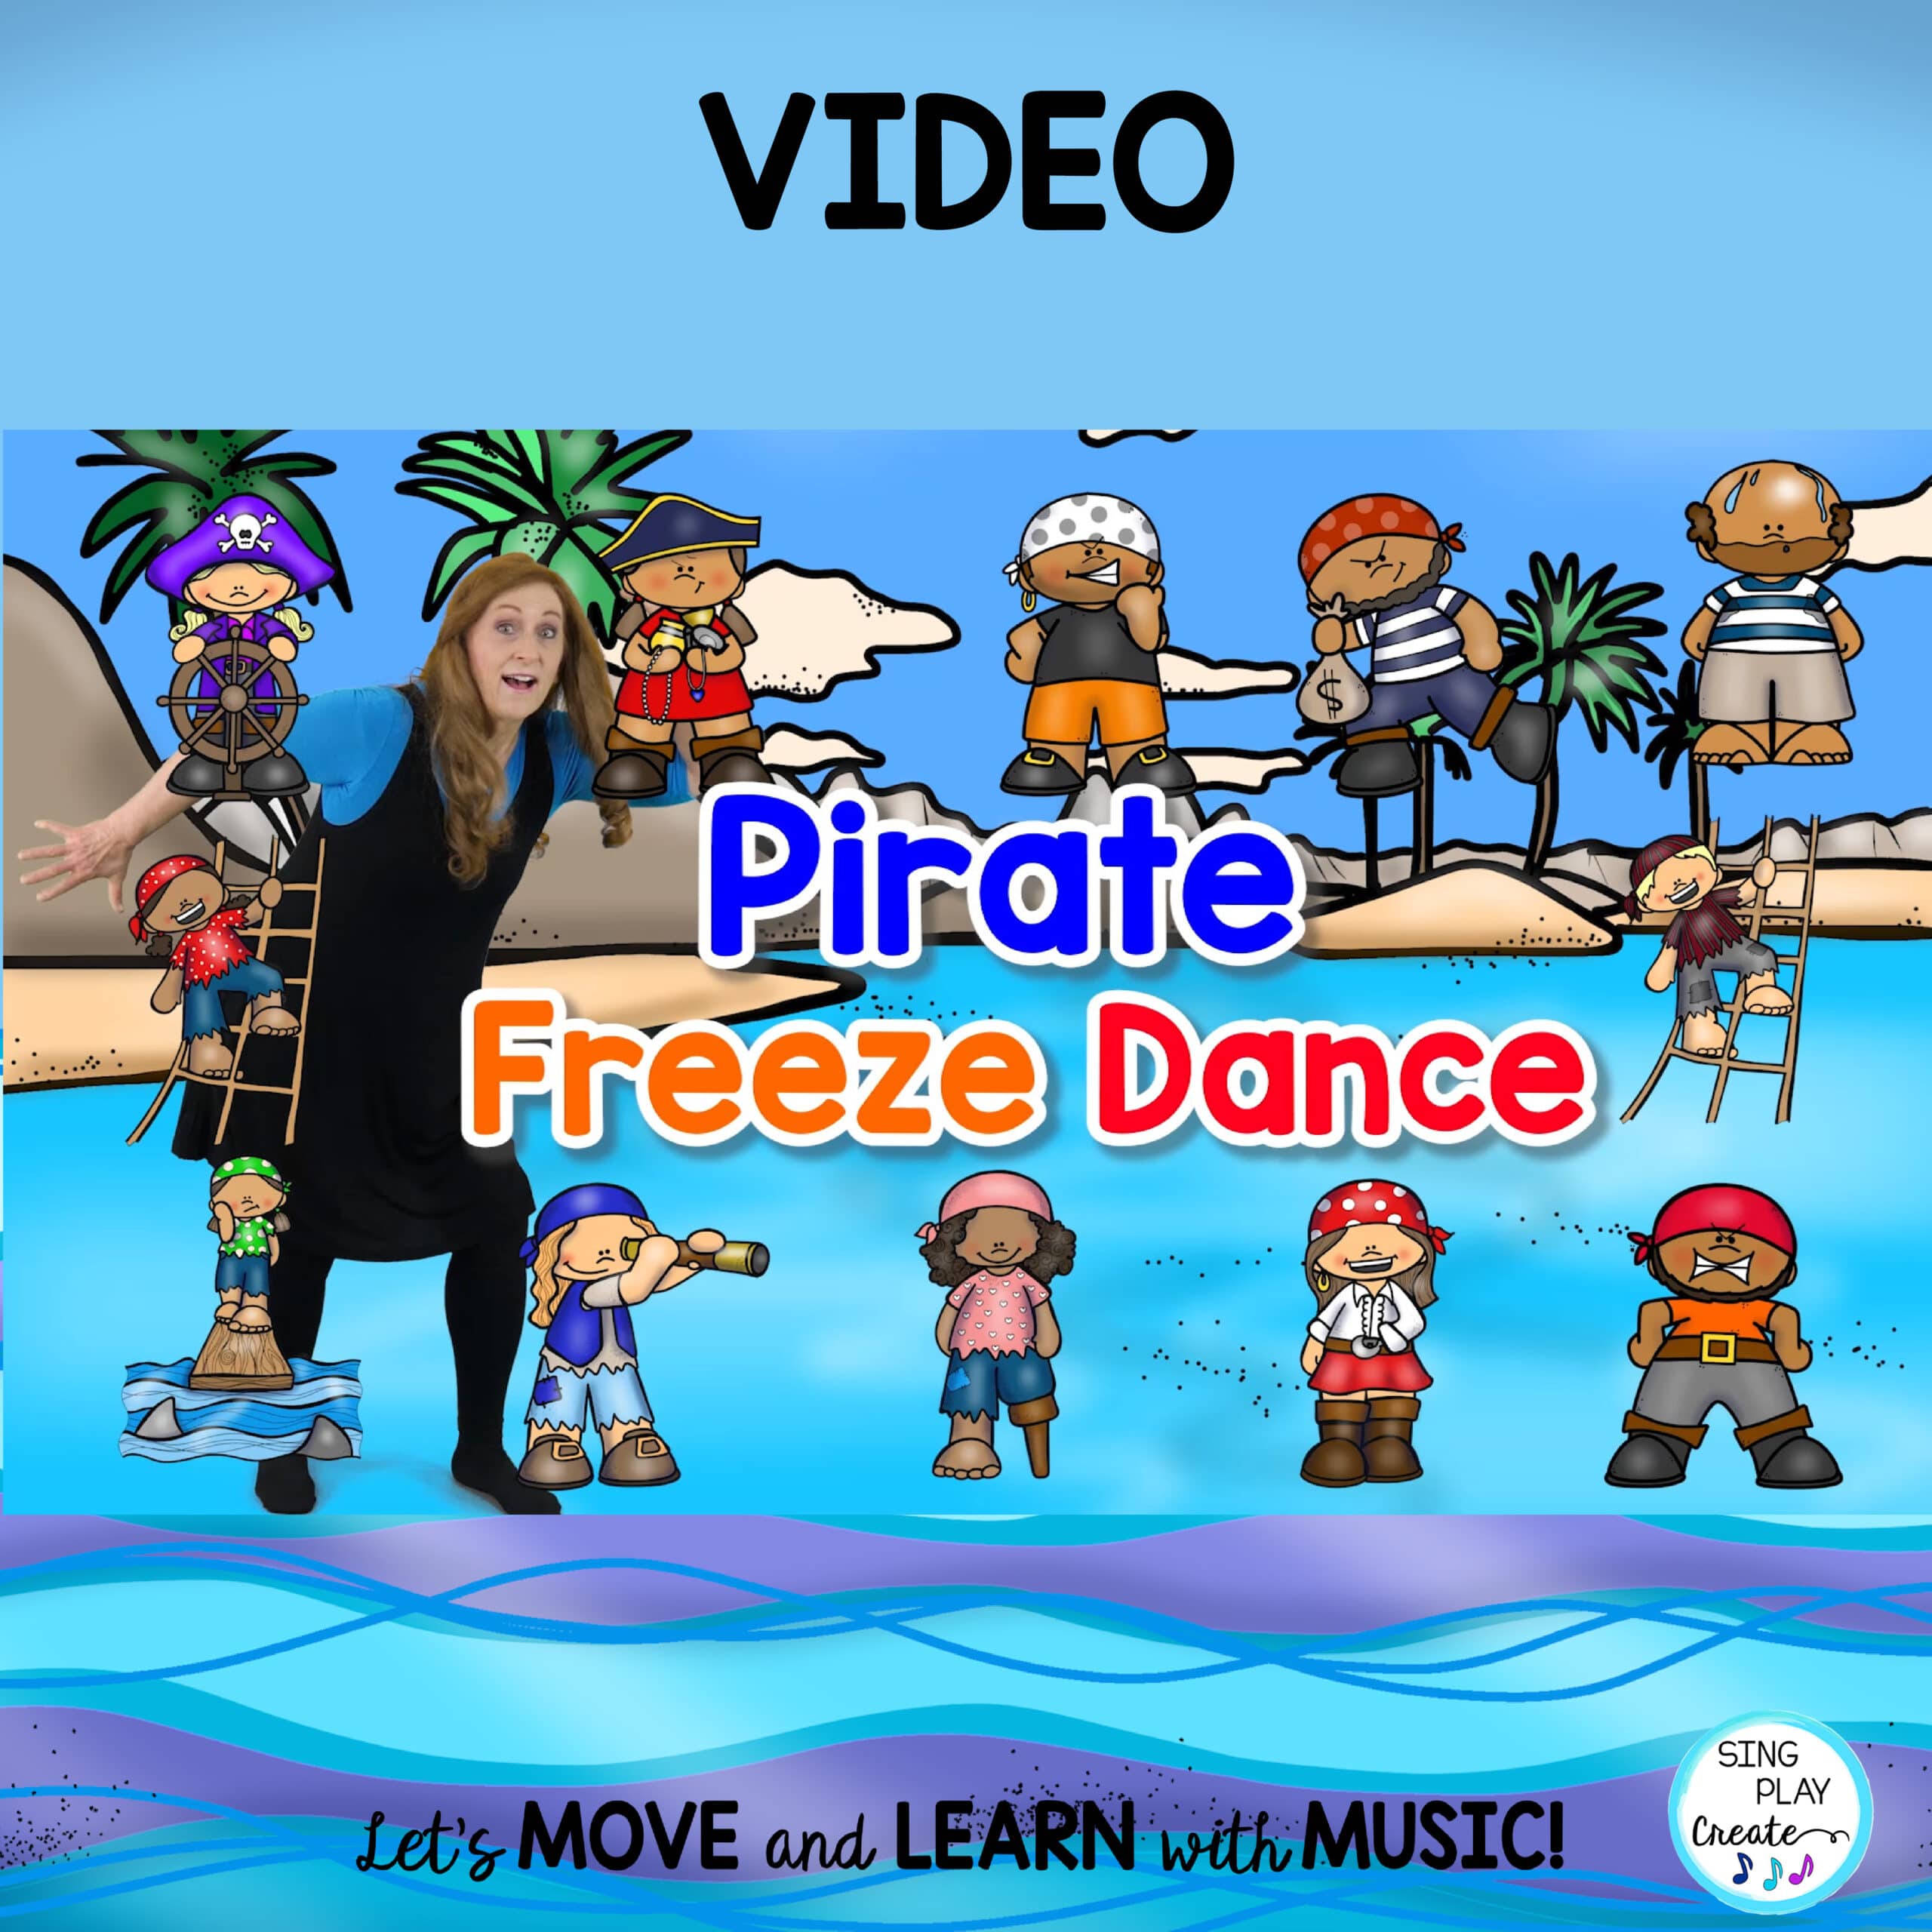 FREEZE DANCE Game Rules - How To Play FREEZE DANCE